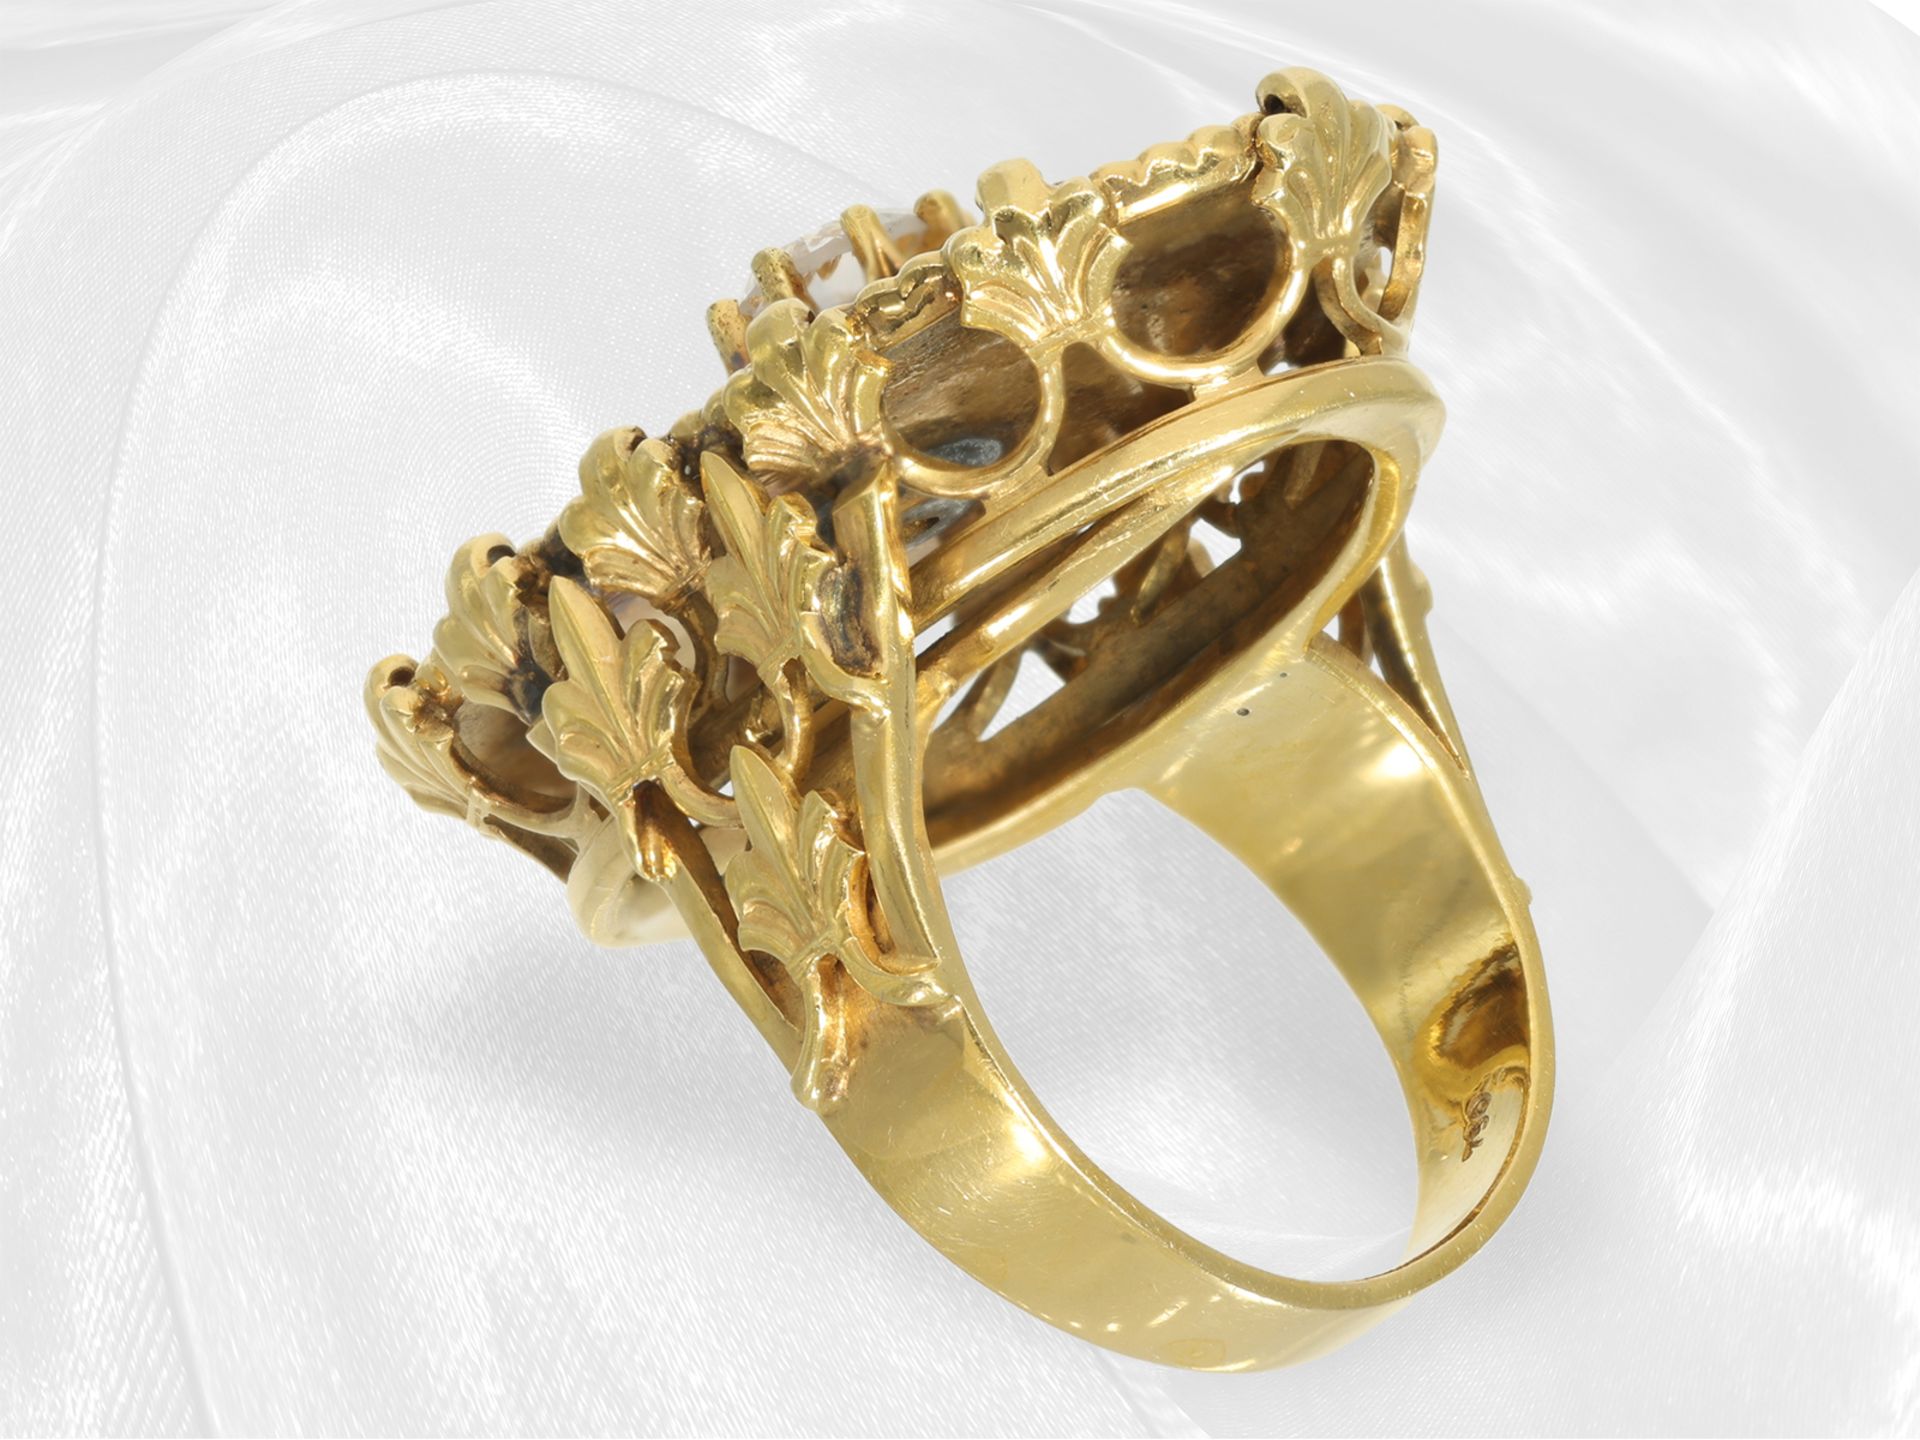 Interestingly made antique enamel/brilliant-cut diamond goldsmith's ring, old handwork in 18K gold - Image 4 of 4